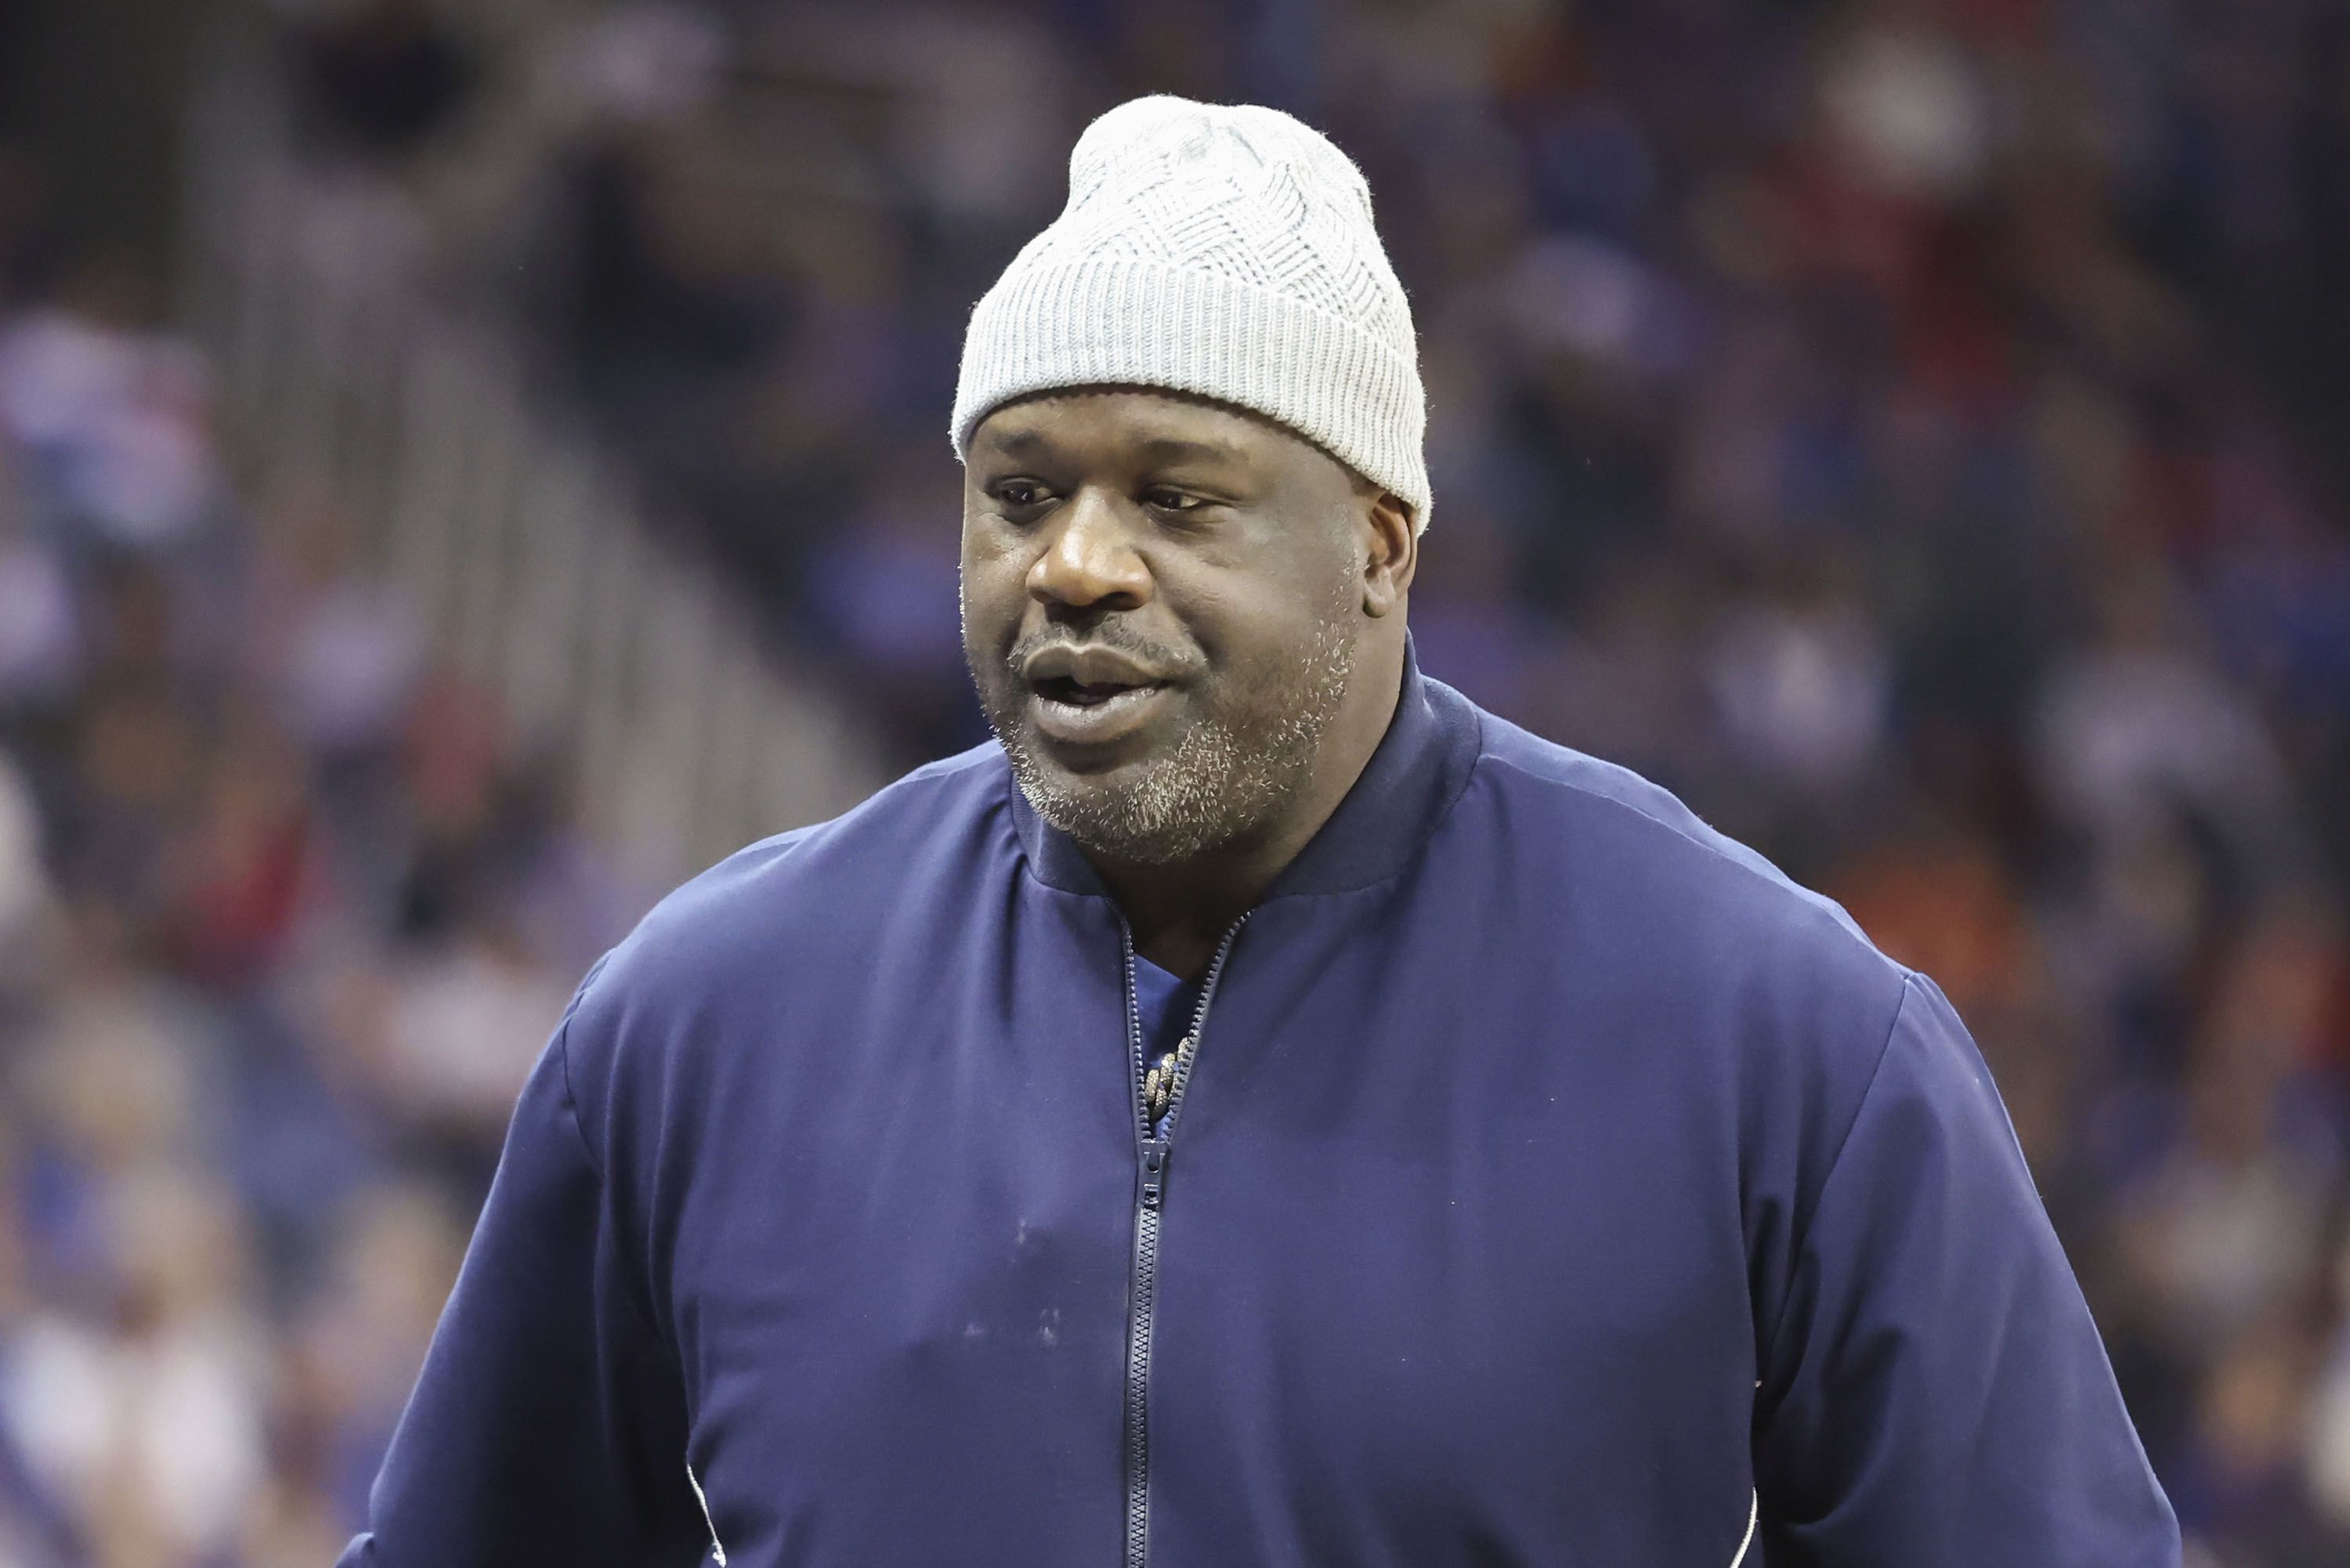 Shaquille O'Neal Calls Angel Reese the 'Greatest Athlete' from LSU